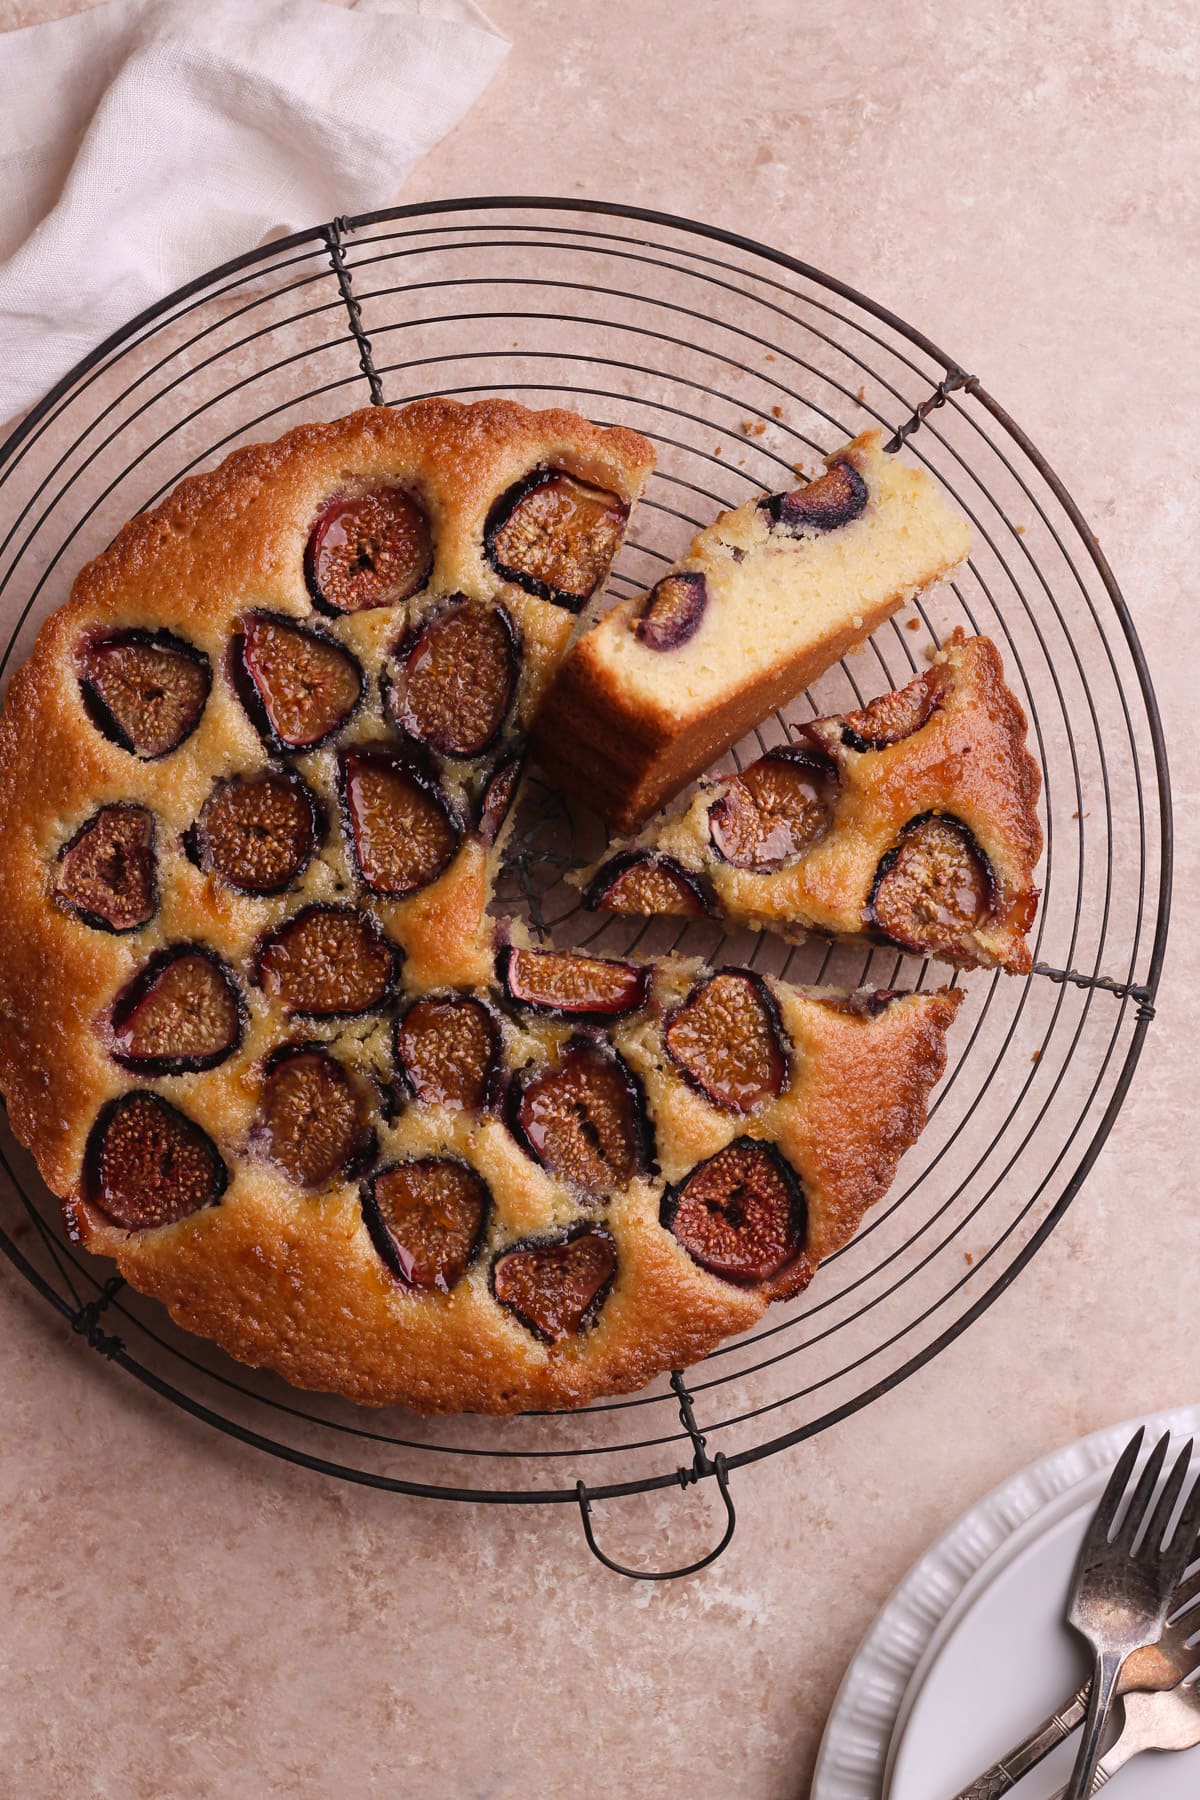 Fig cake with slices cut out on a wire rack.